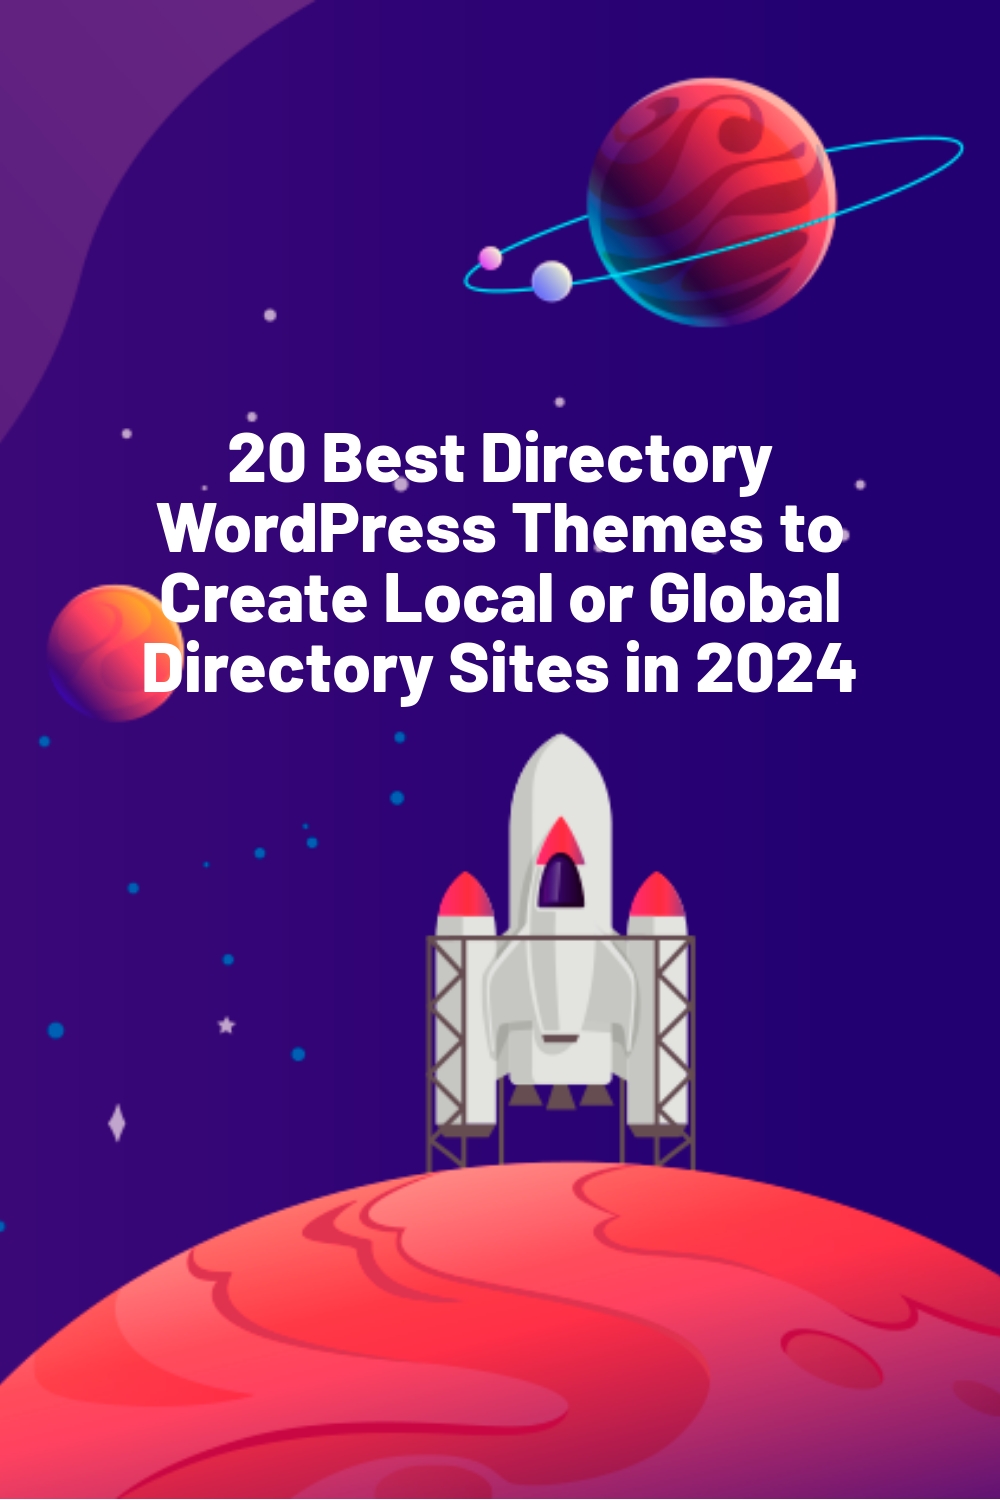 20 Best Directory WordPress Themes to Create Local or Global Directory Sites in 2024